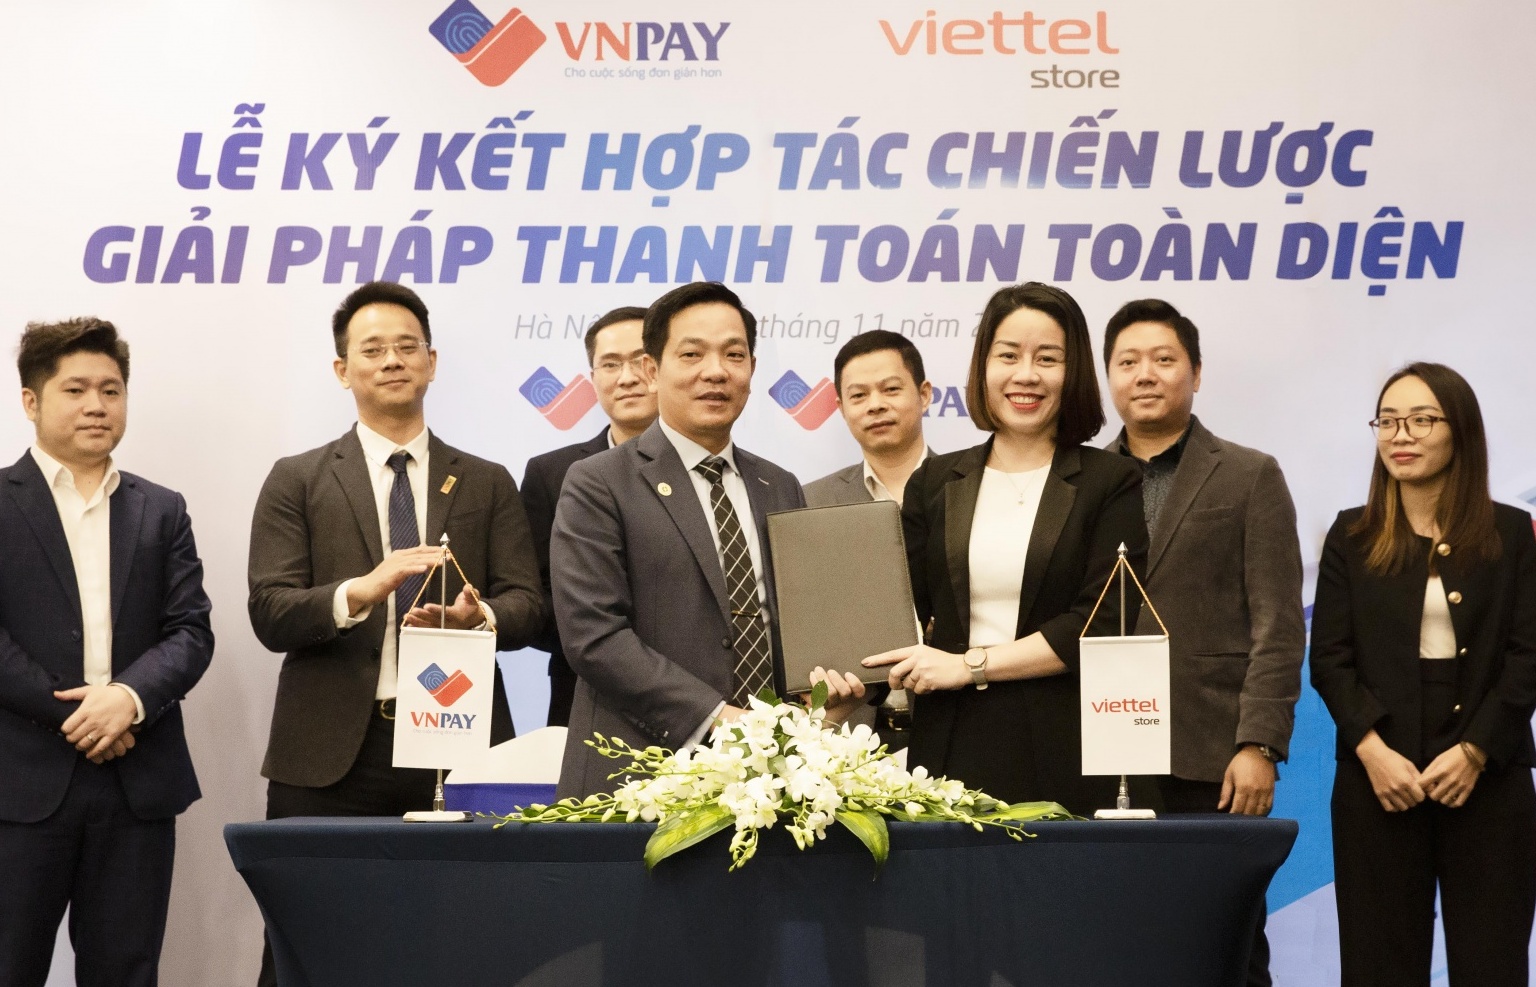 vnpay and viettel store launch all in one vnpay pos payment solution